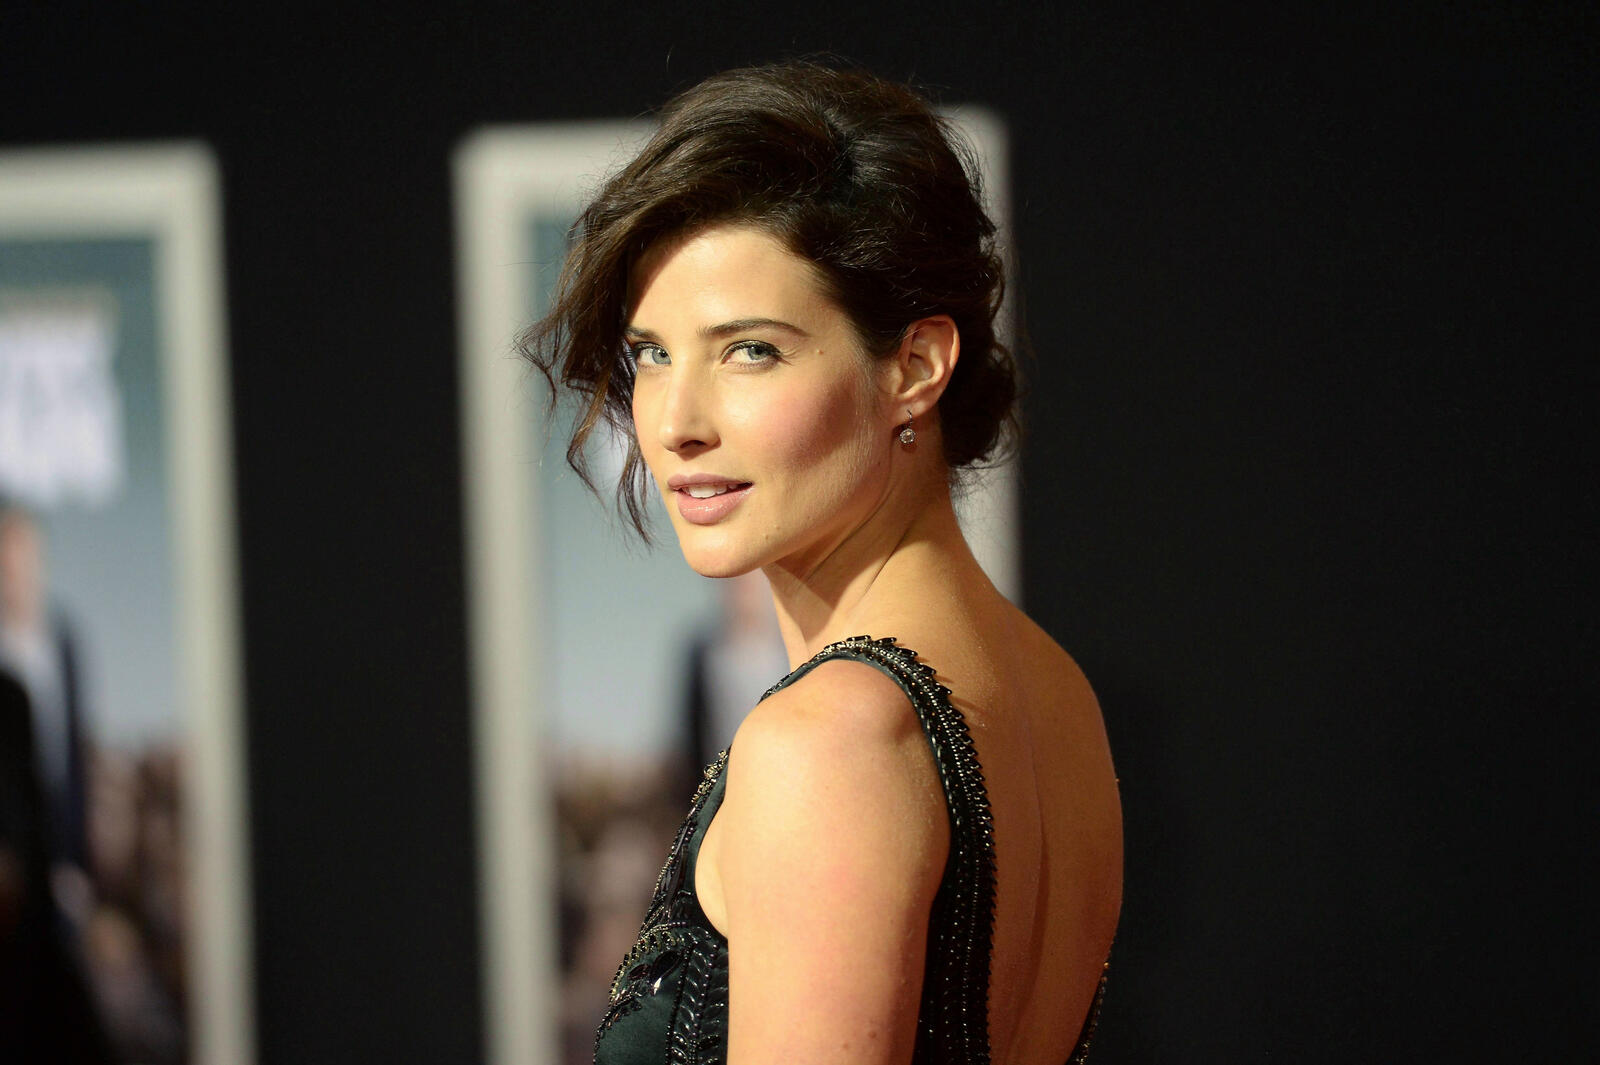 Free photo The brunette Cobie Smulders turned on the photographer